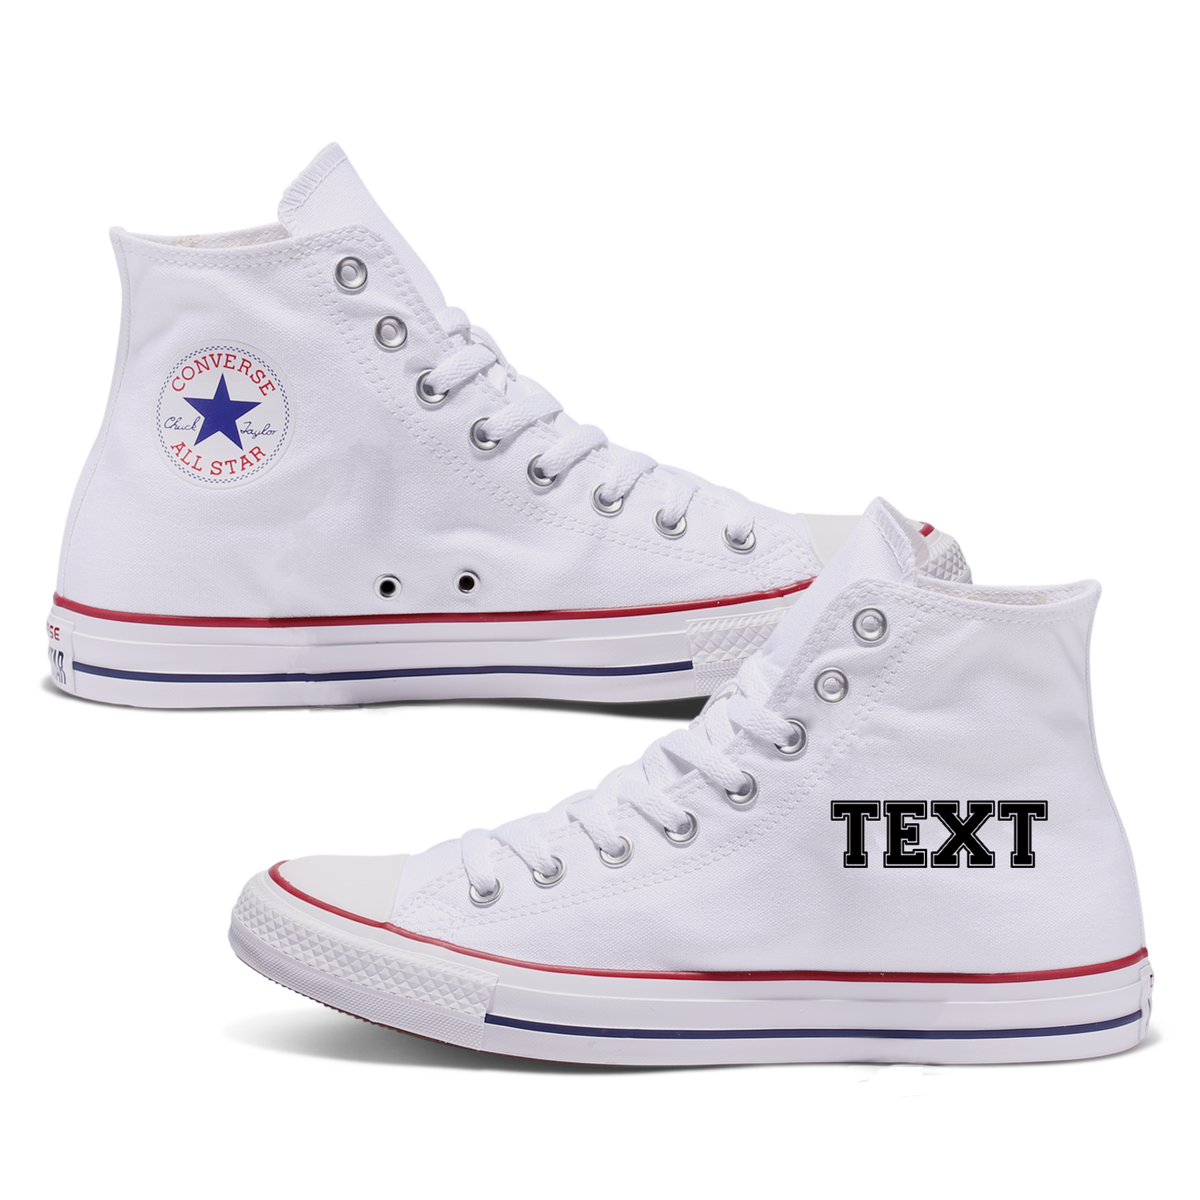 Personalised Adult Converse Shoes